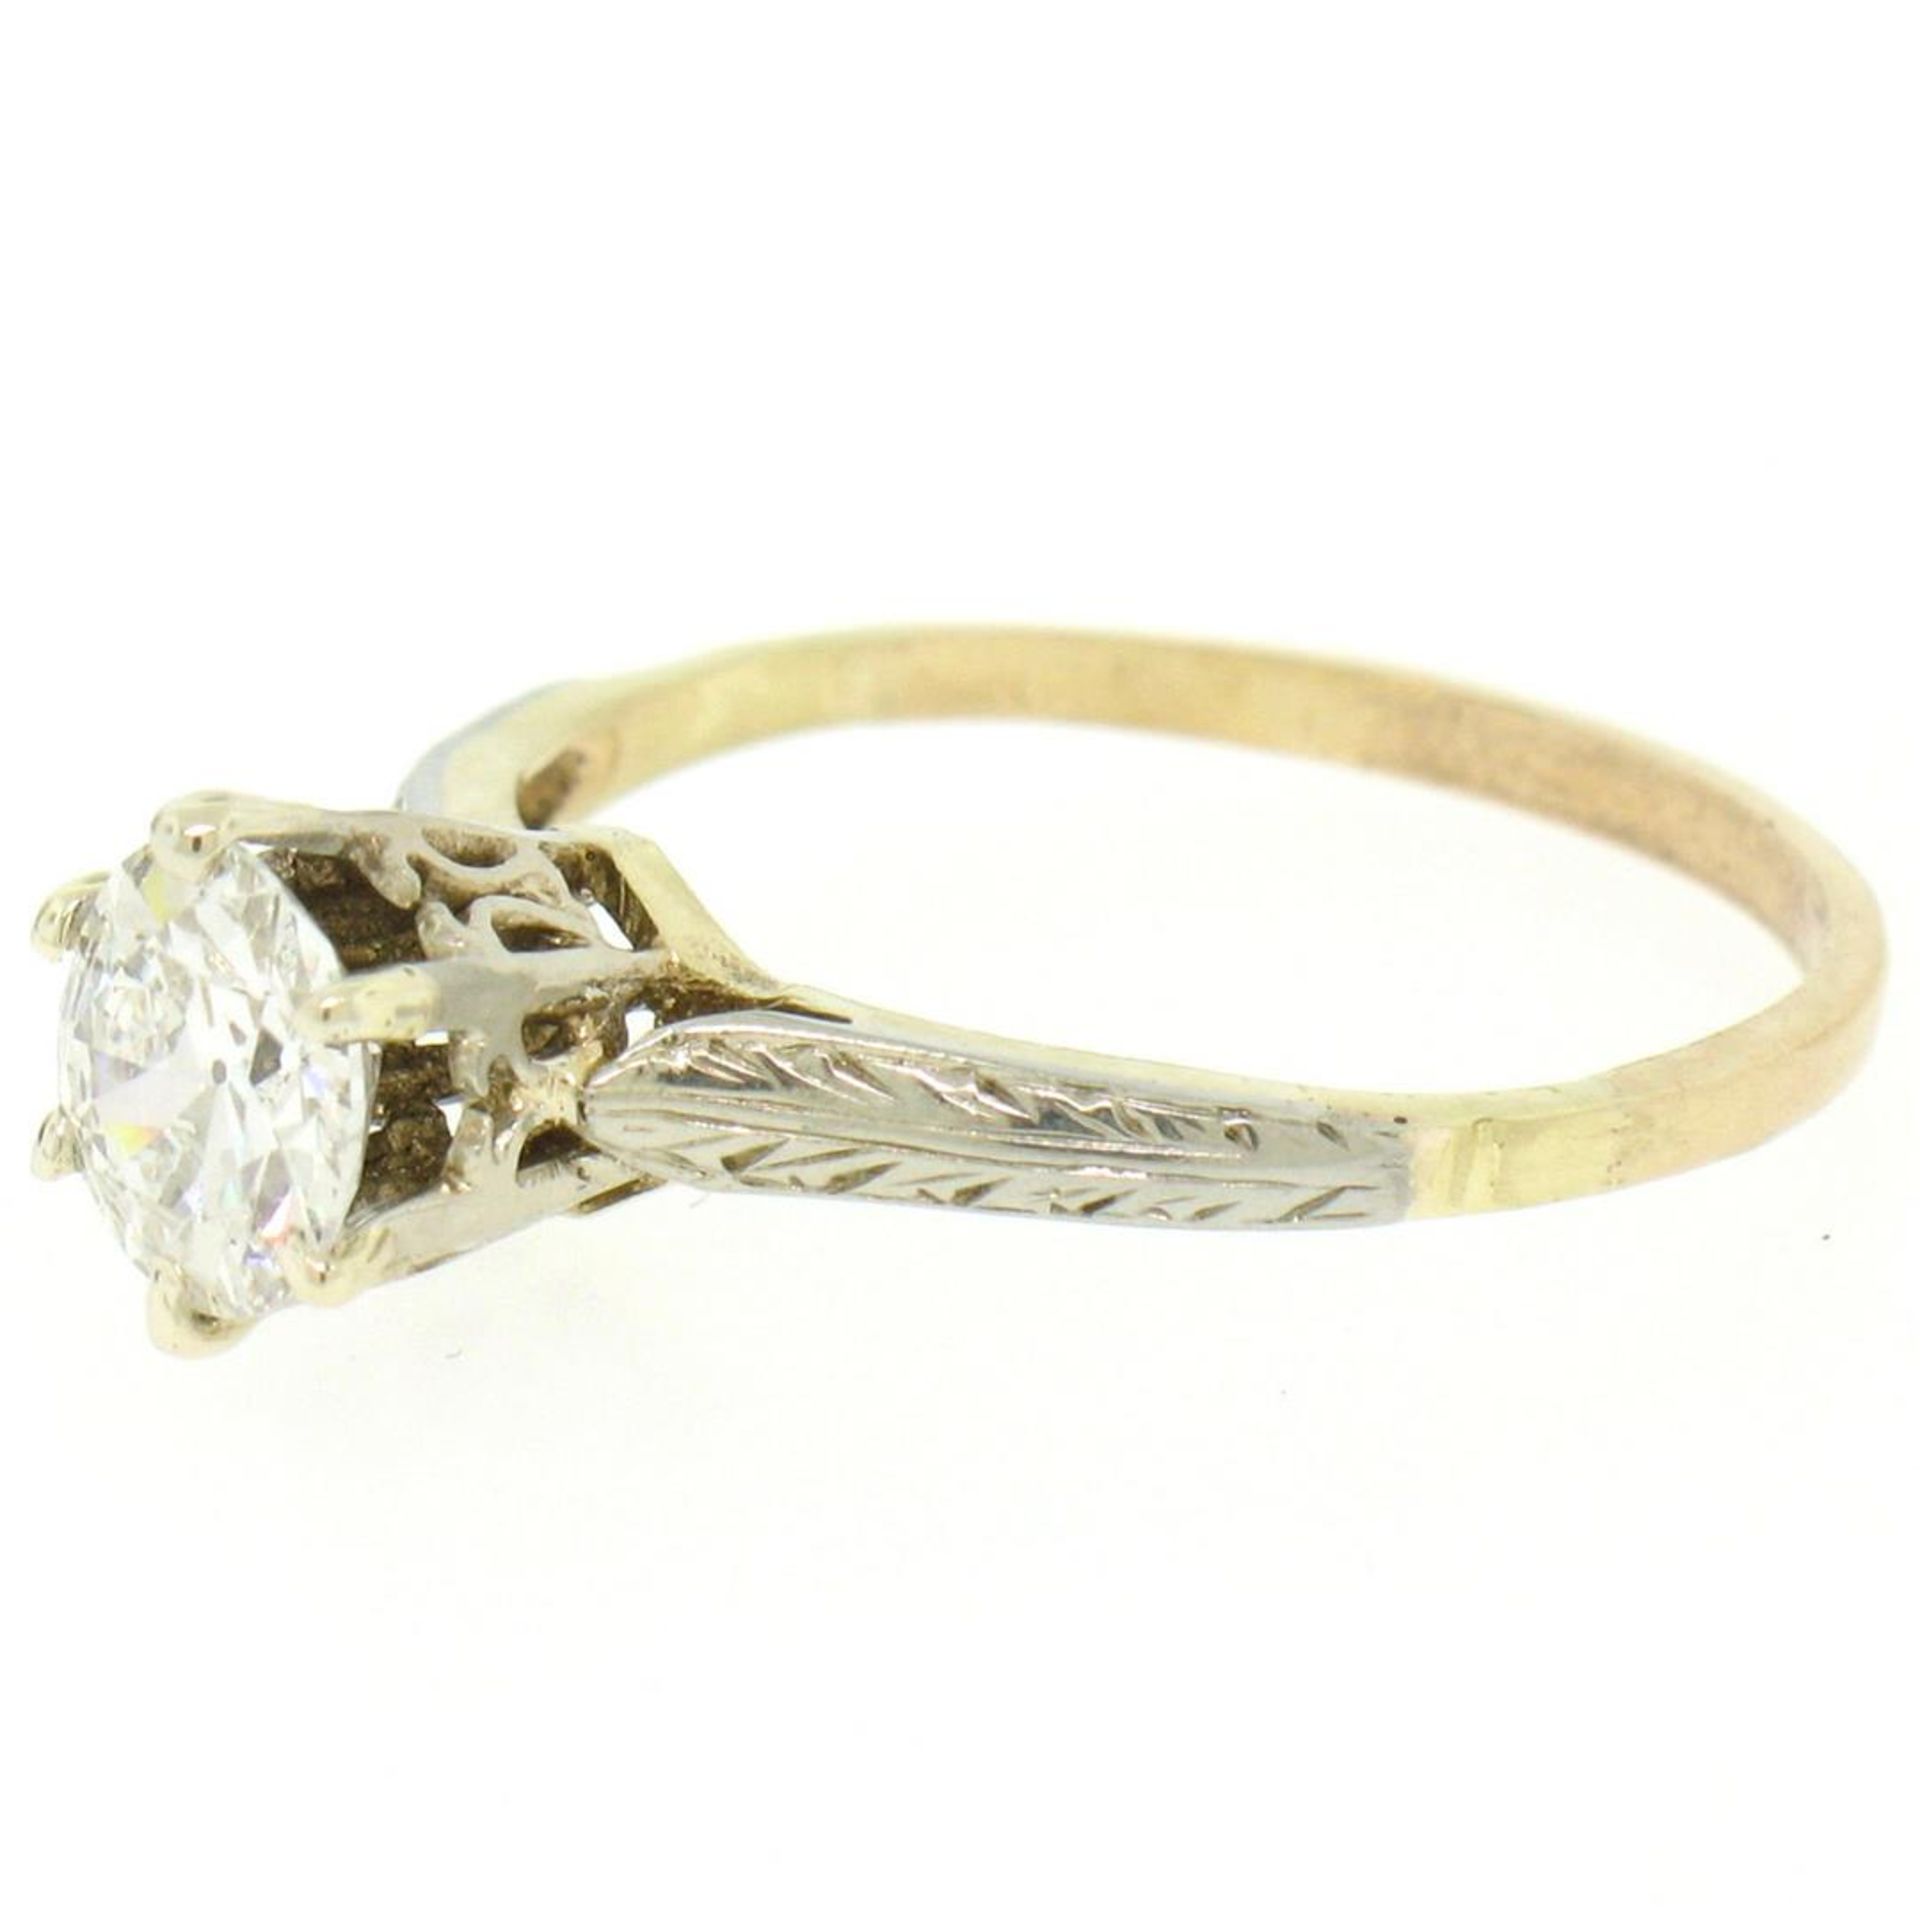 Etched 14k TT Gold .80 ct European Cut Diamond Solitaire Engagement Ring - Image 5 of 7